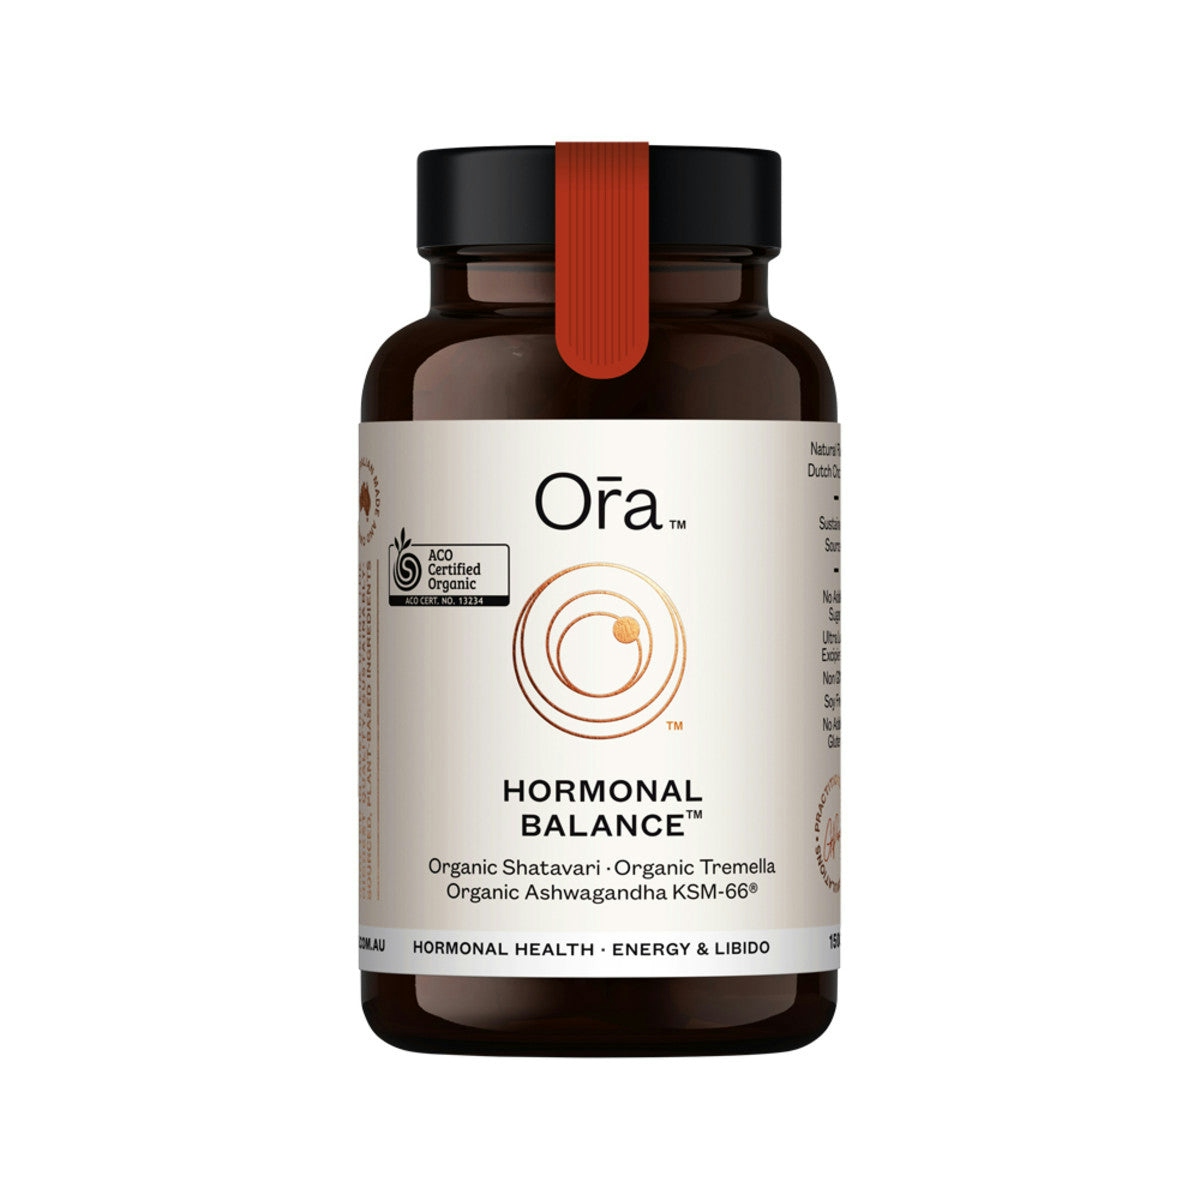 Image of Ora Hormonal Balance oral powder 150g with a white background